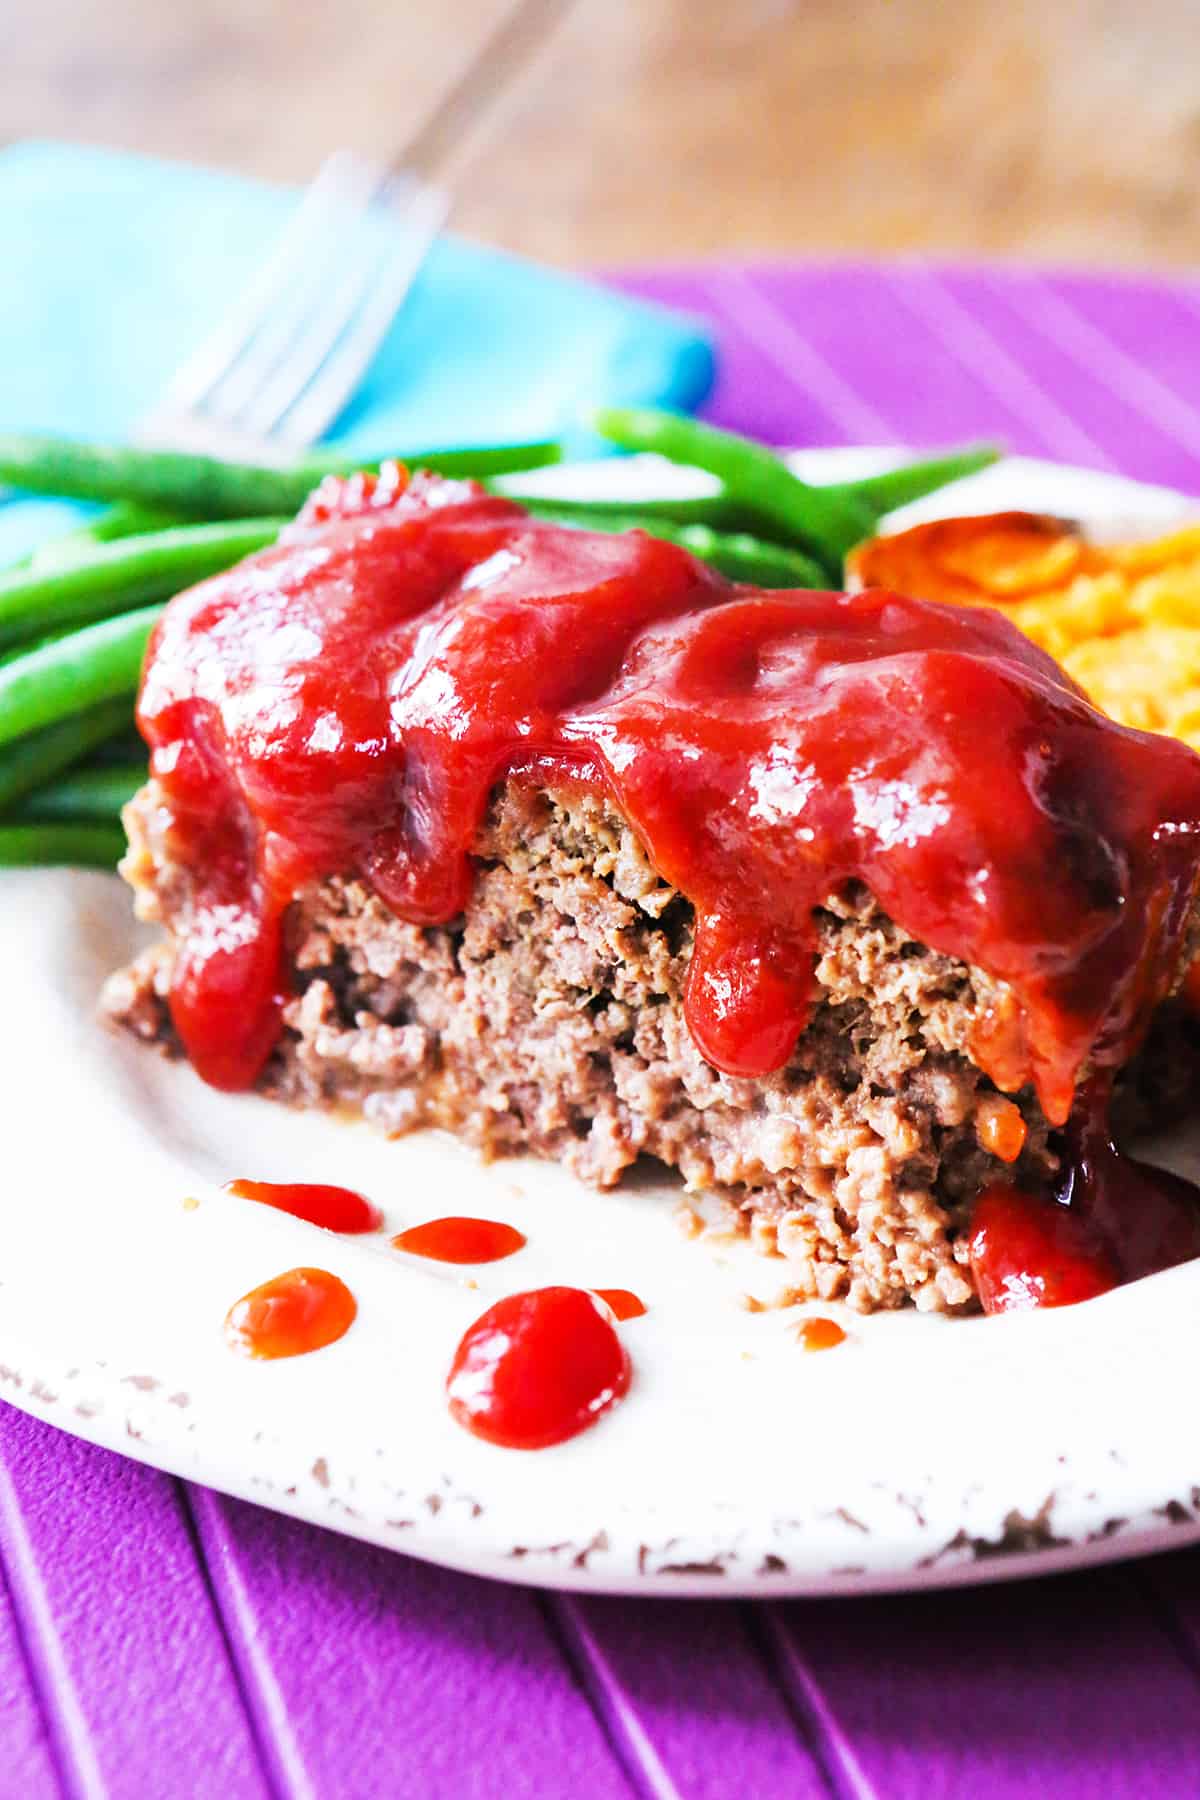 Slice of meatloaf on a plate with sauce dripping down sides.